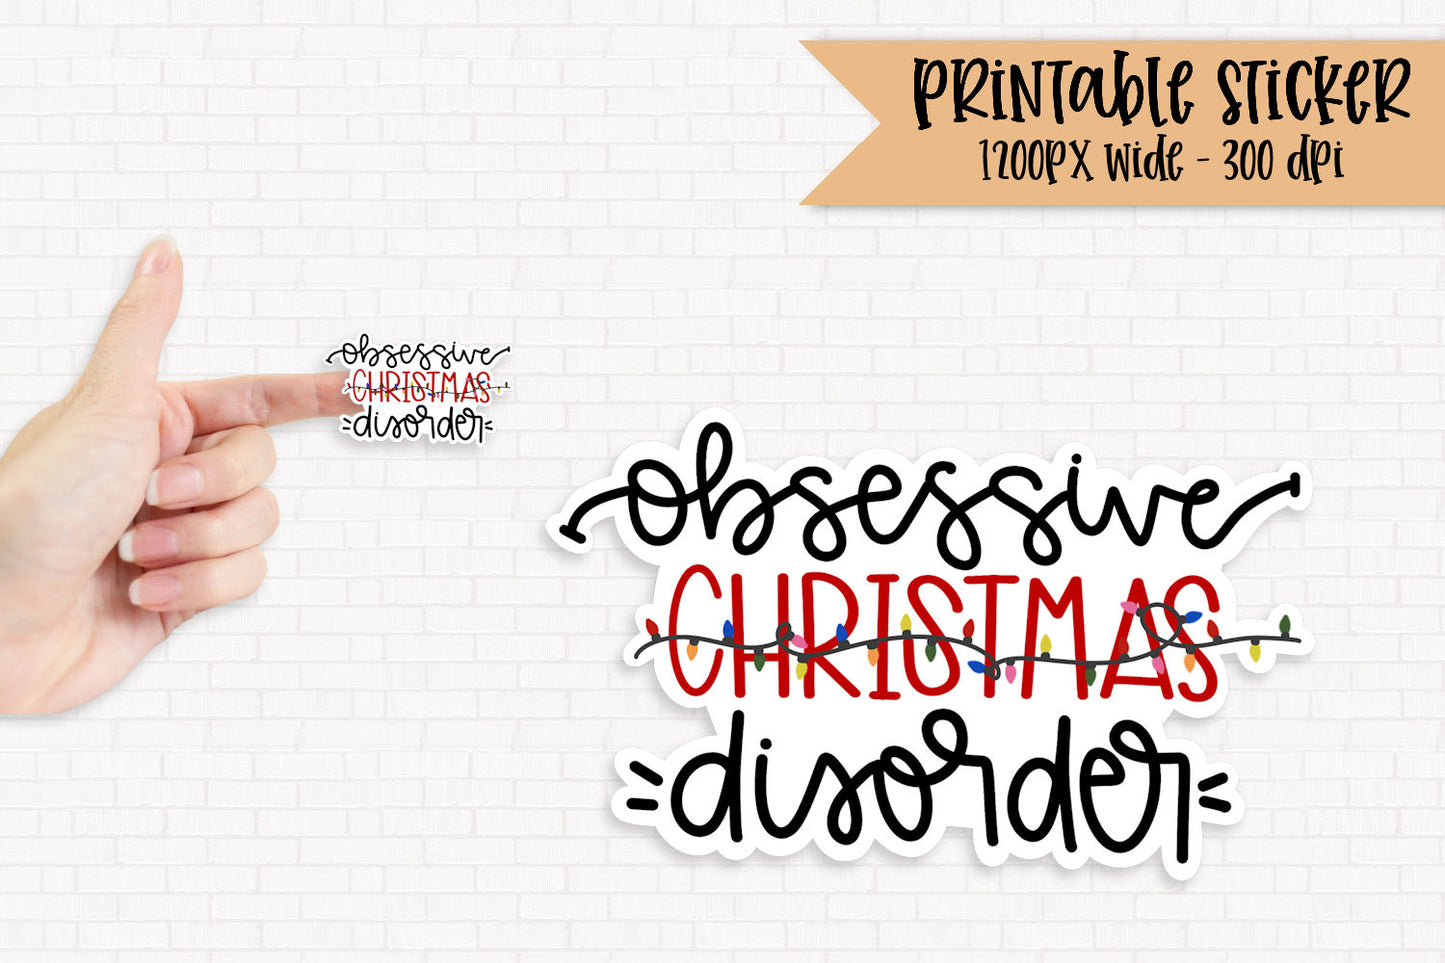 Obsessive Christmas Disorder - PNG Printable Sticker